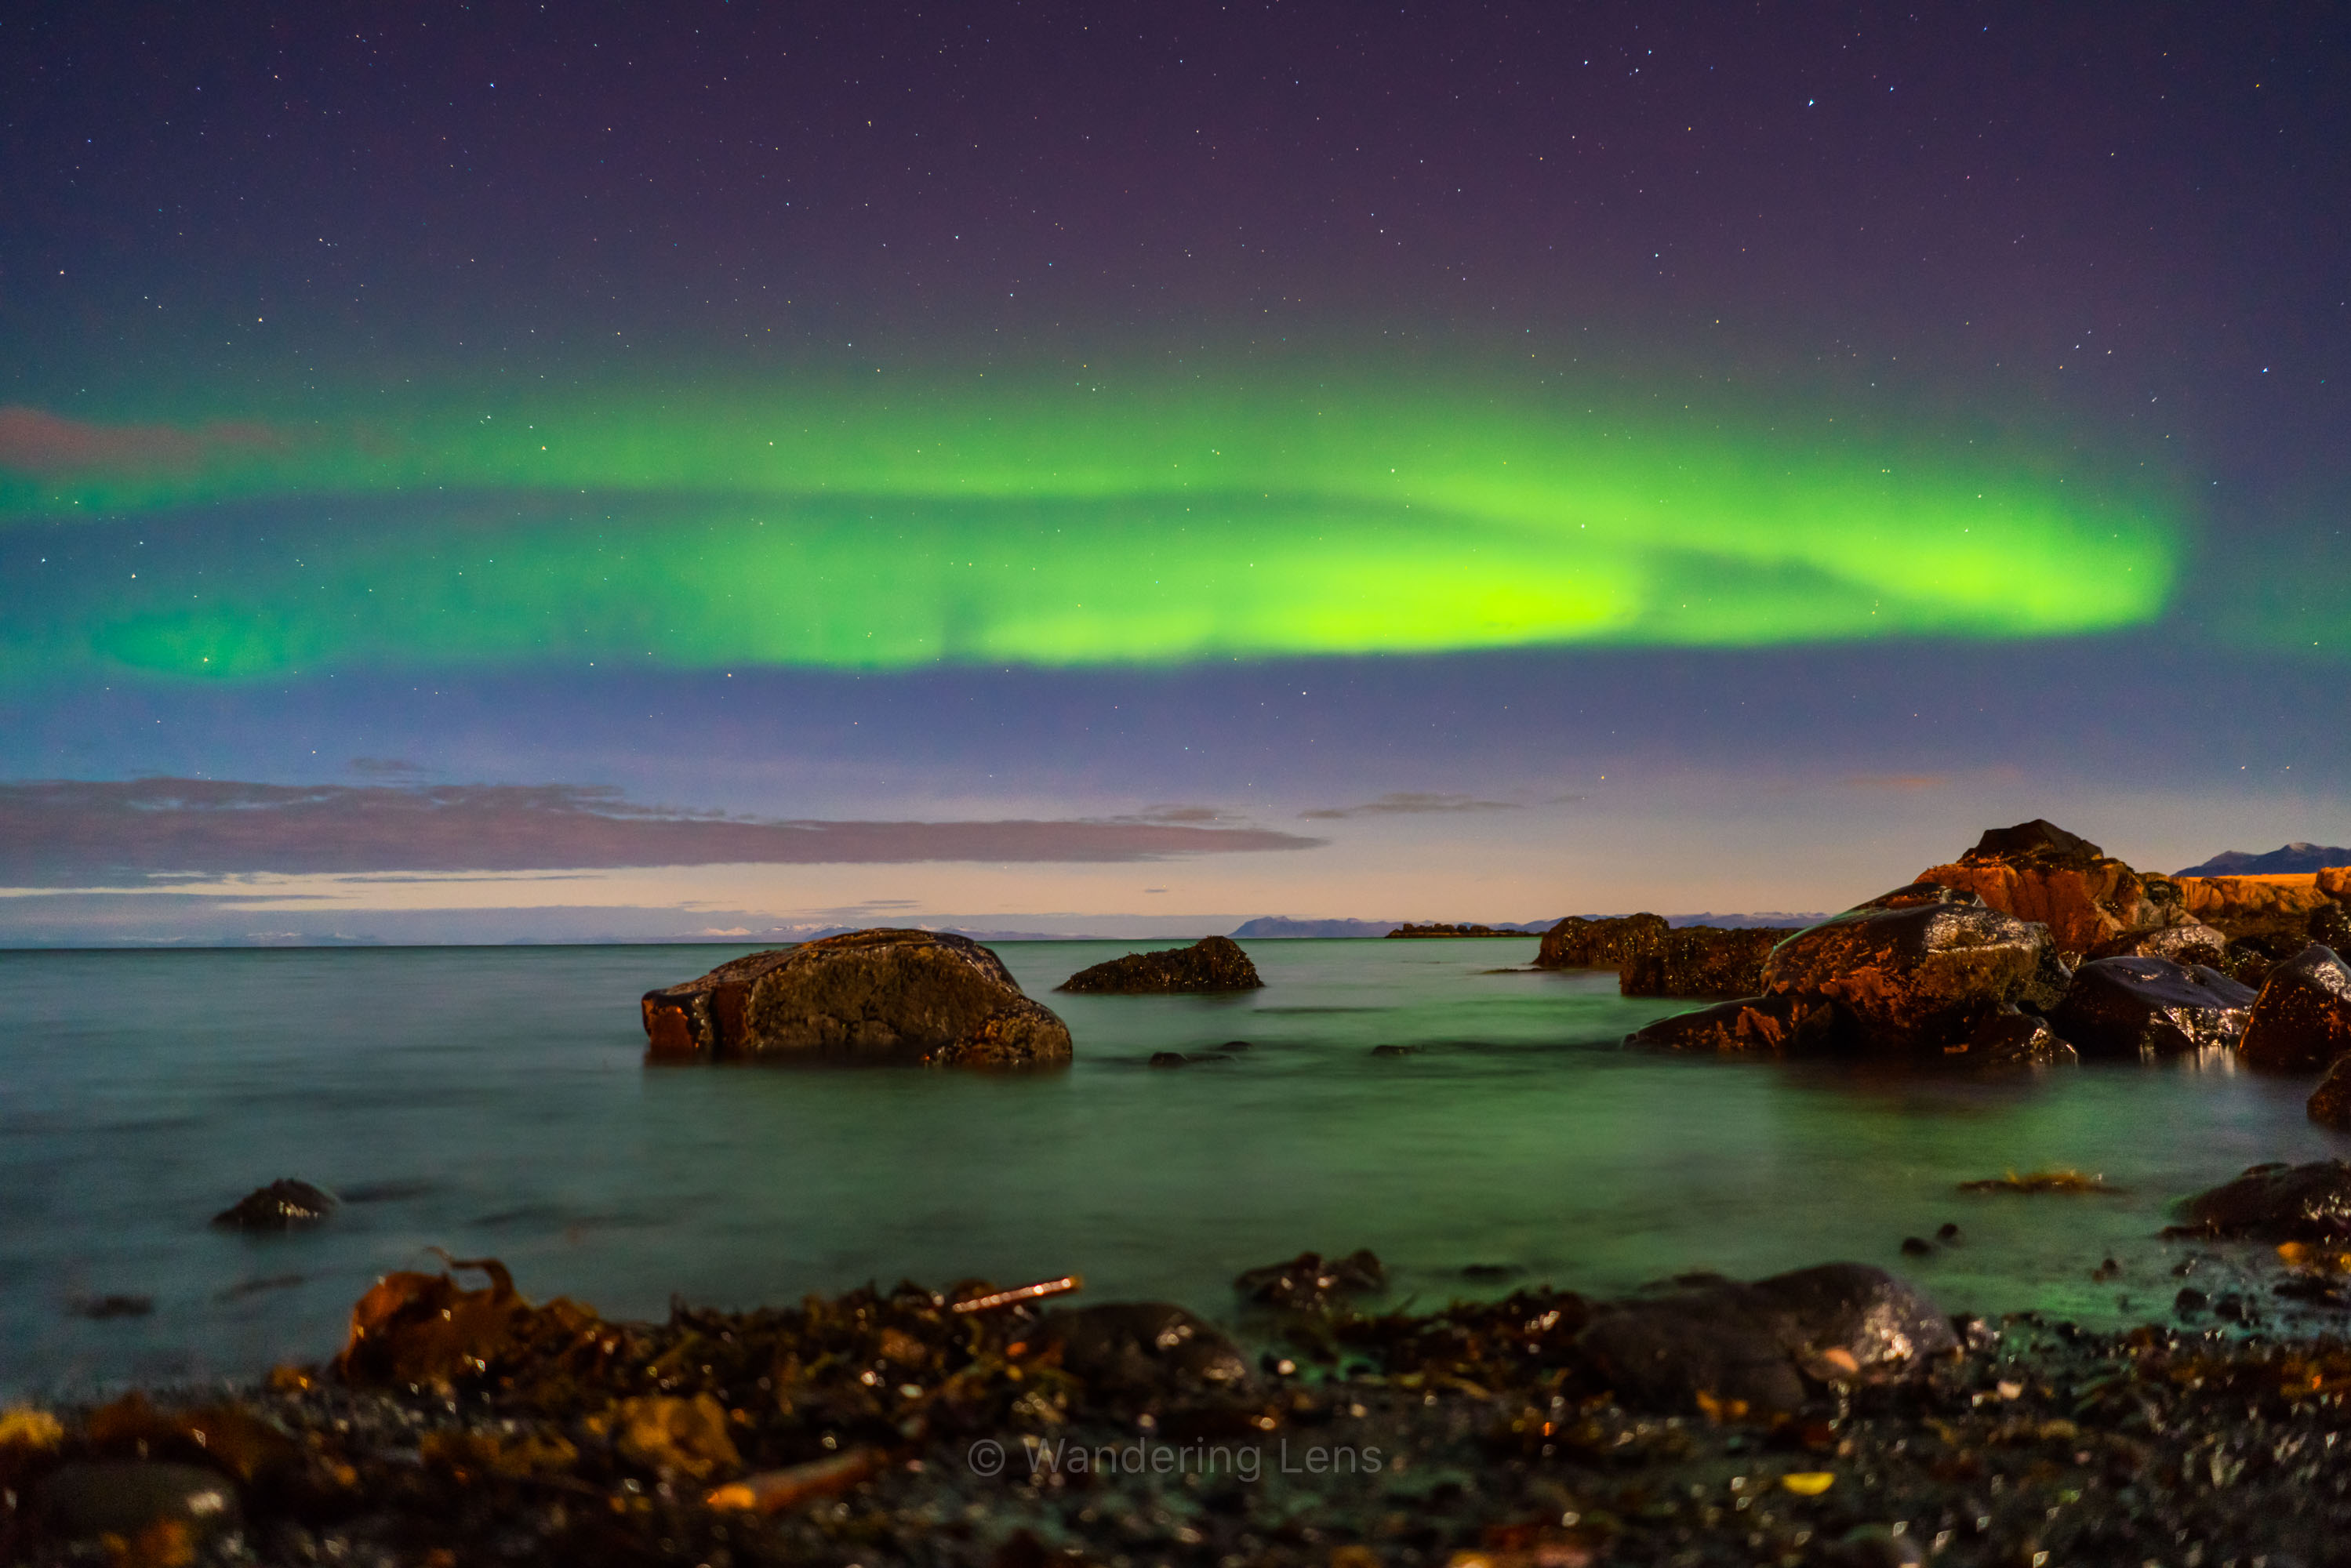 Northern lights over the ocean